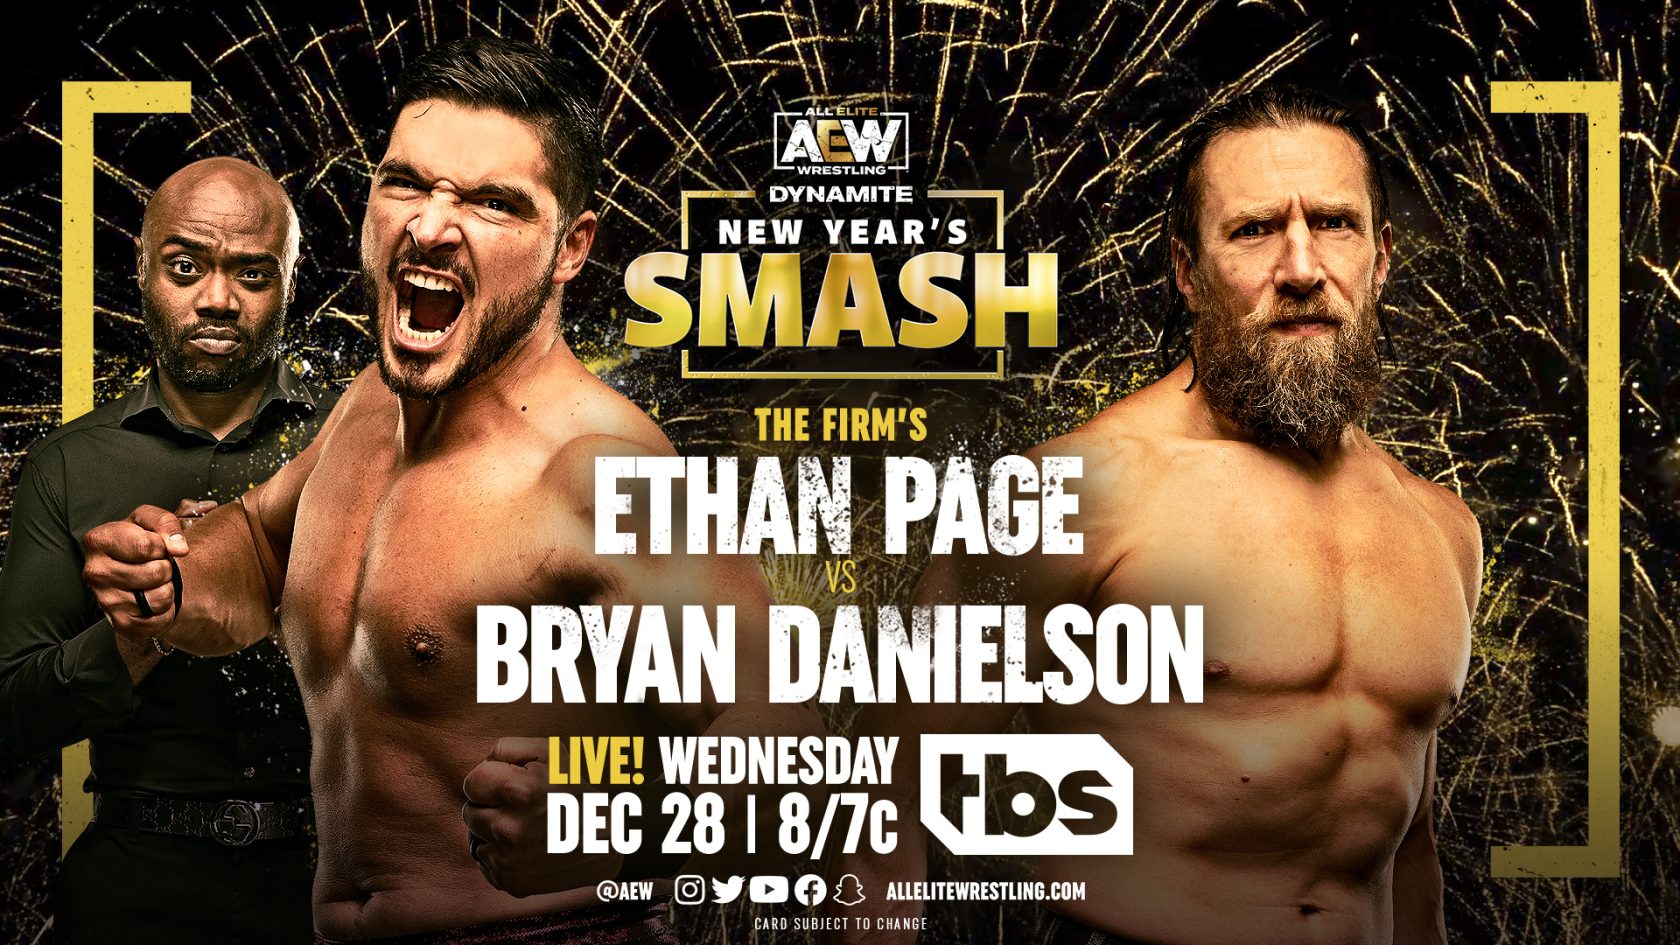 AEW Dynamite "New Year's Smash" Preview December 28th TJR Wrestling